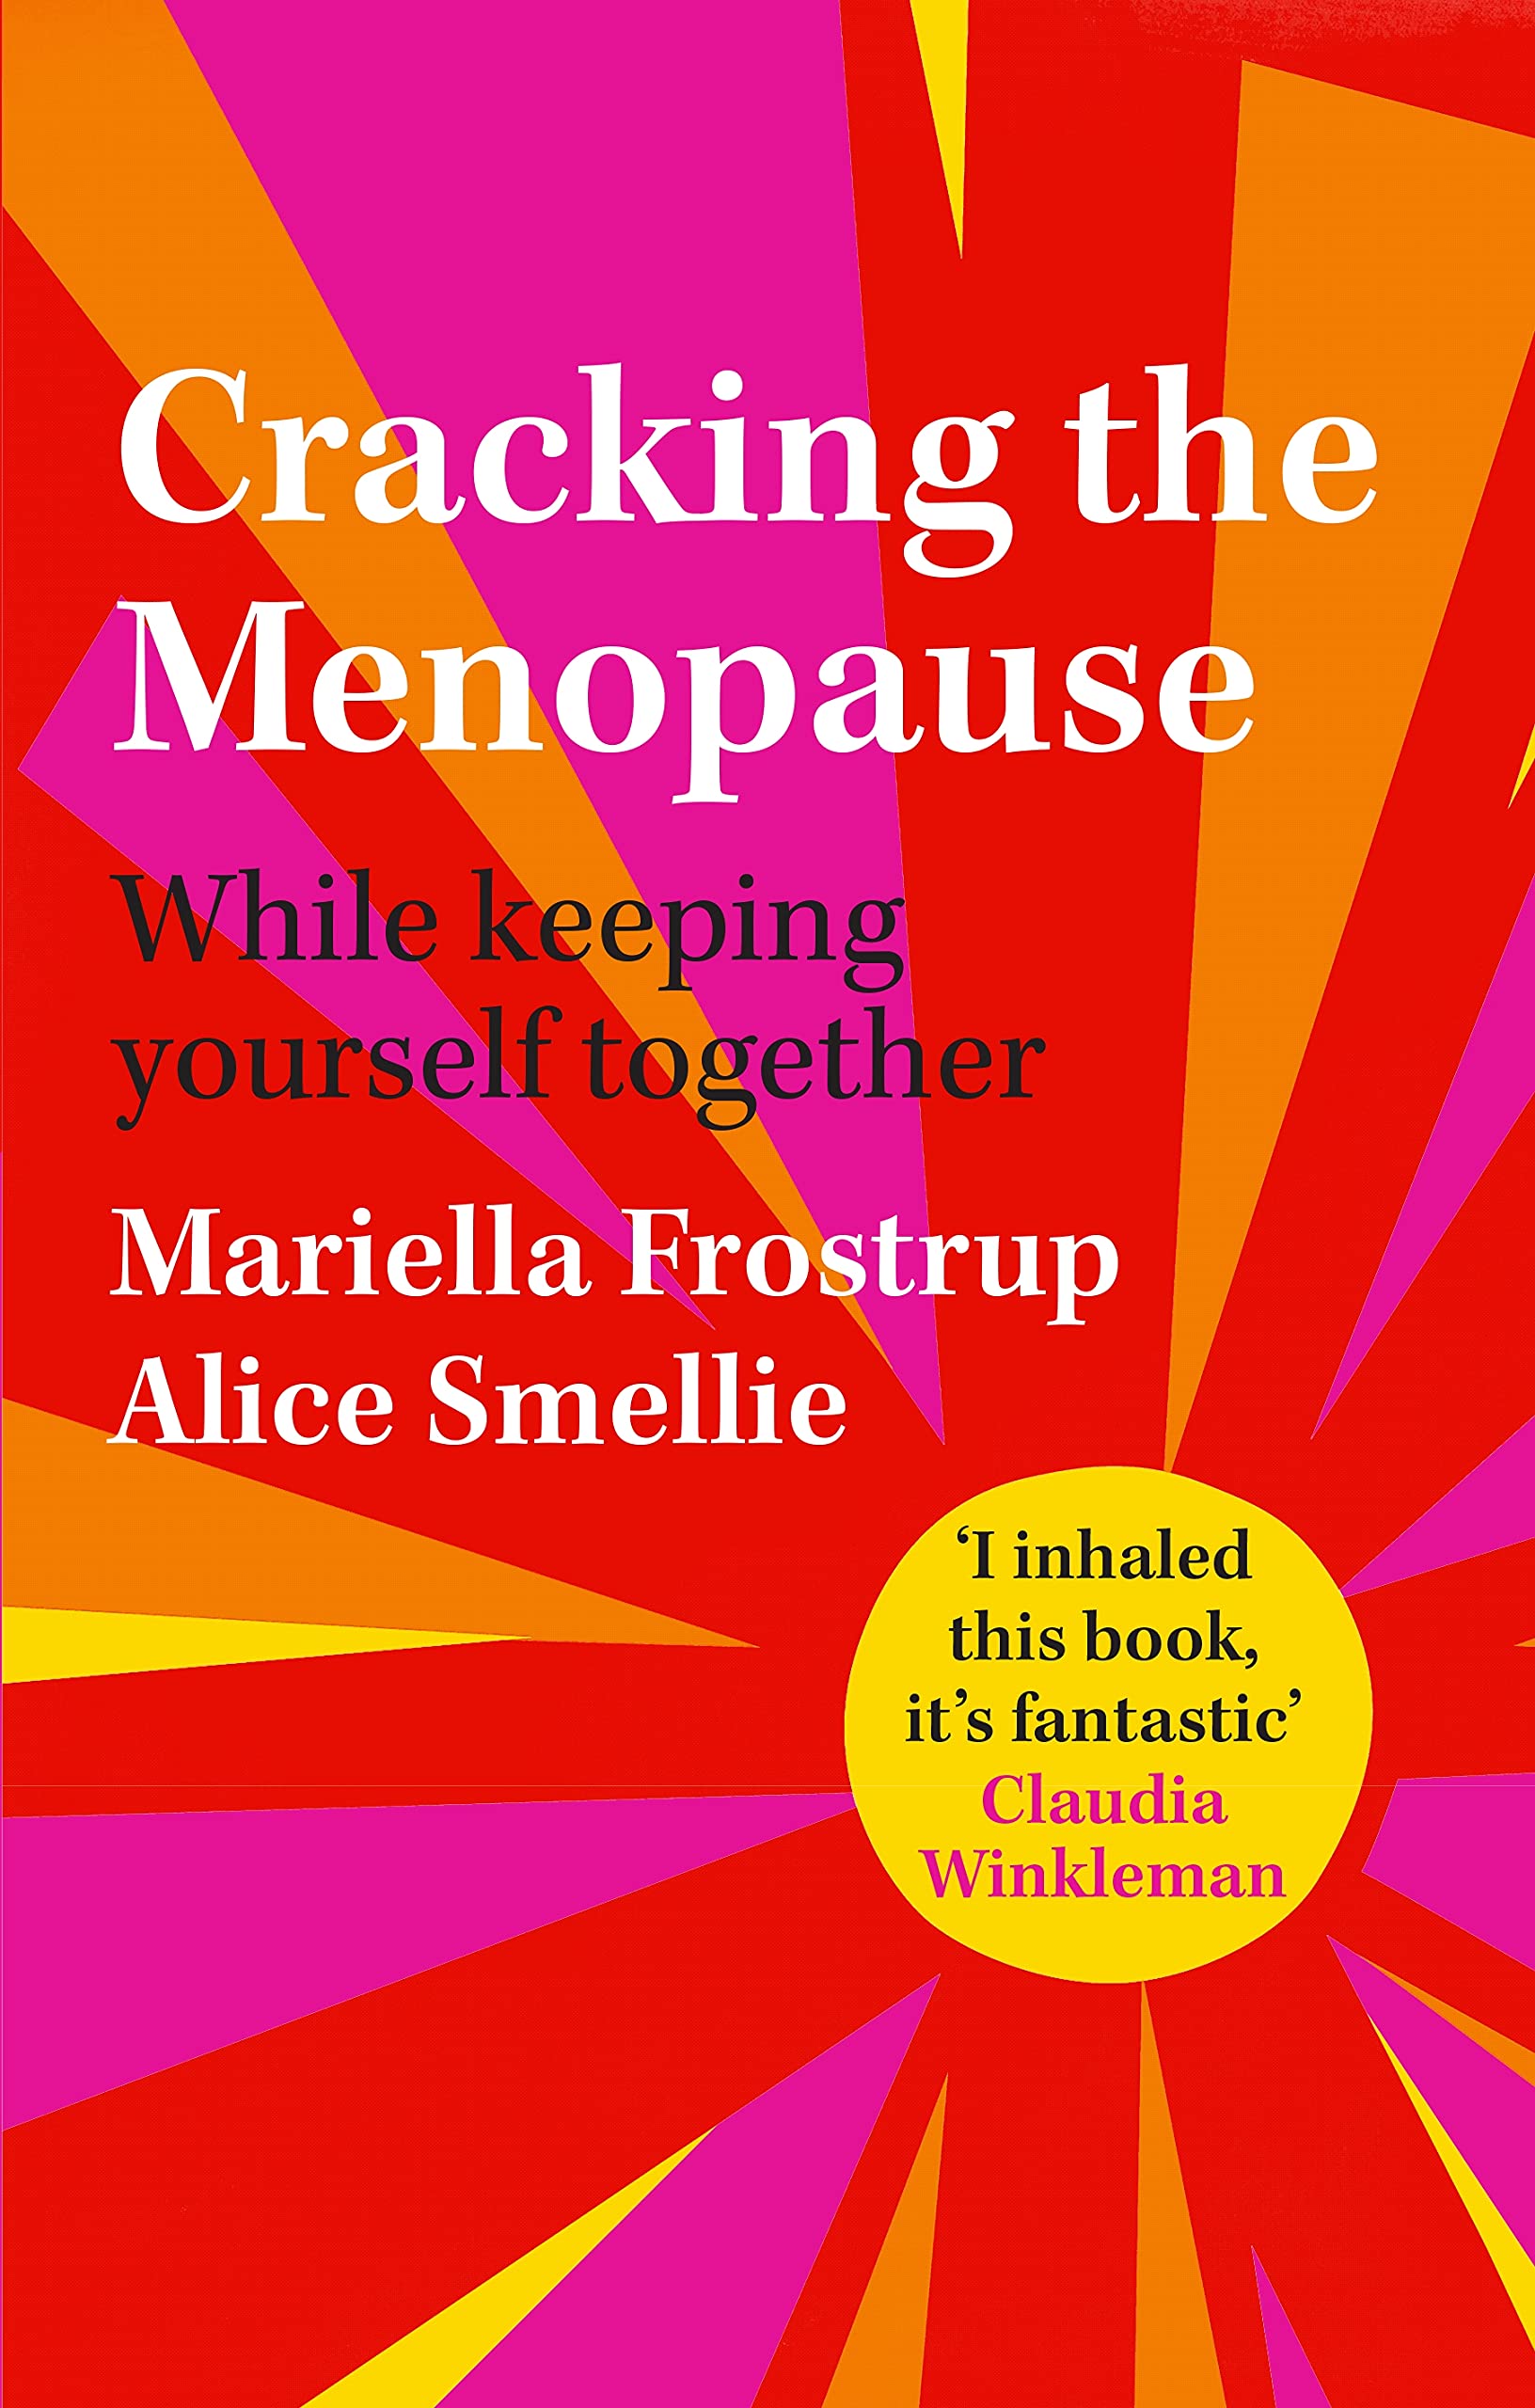 Cracking The Menopause | Mariella Frostrup, Alice Smellie